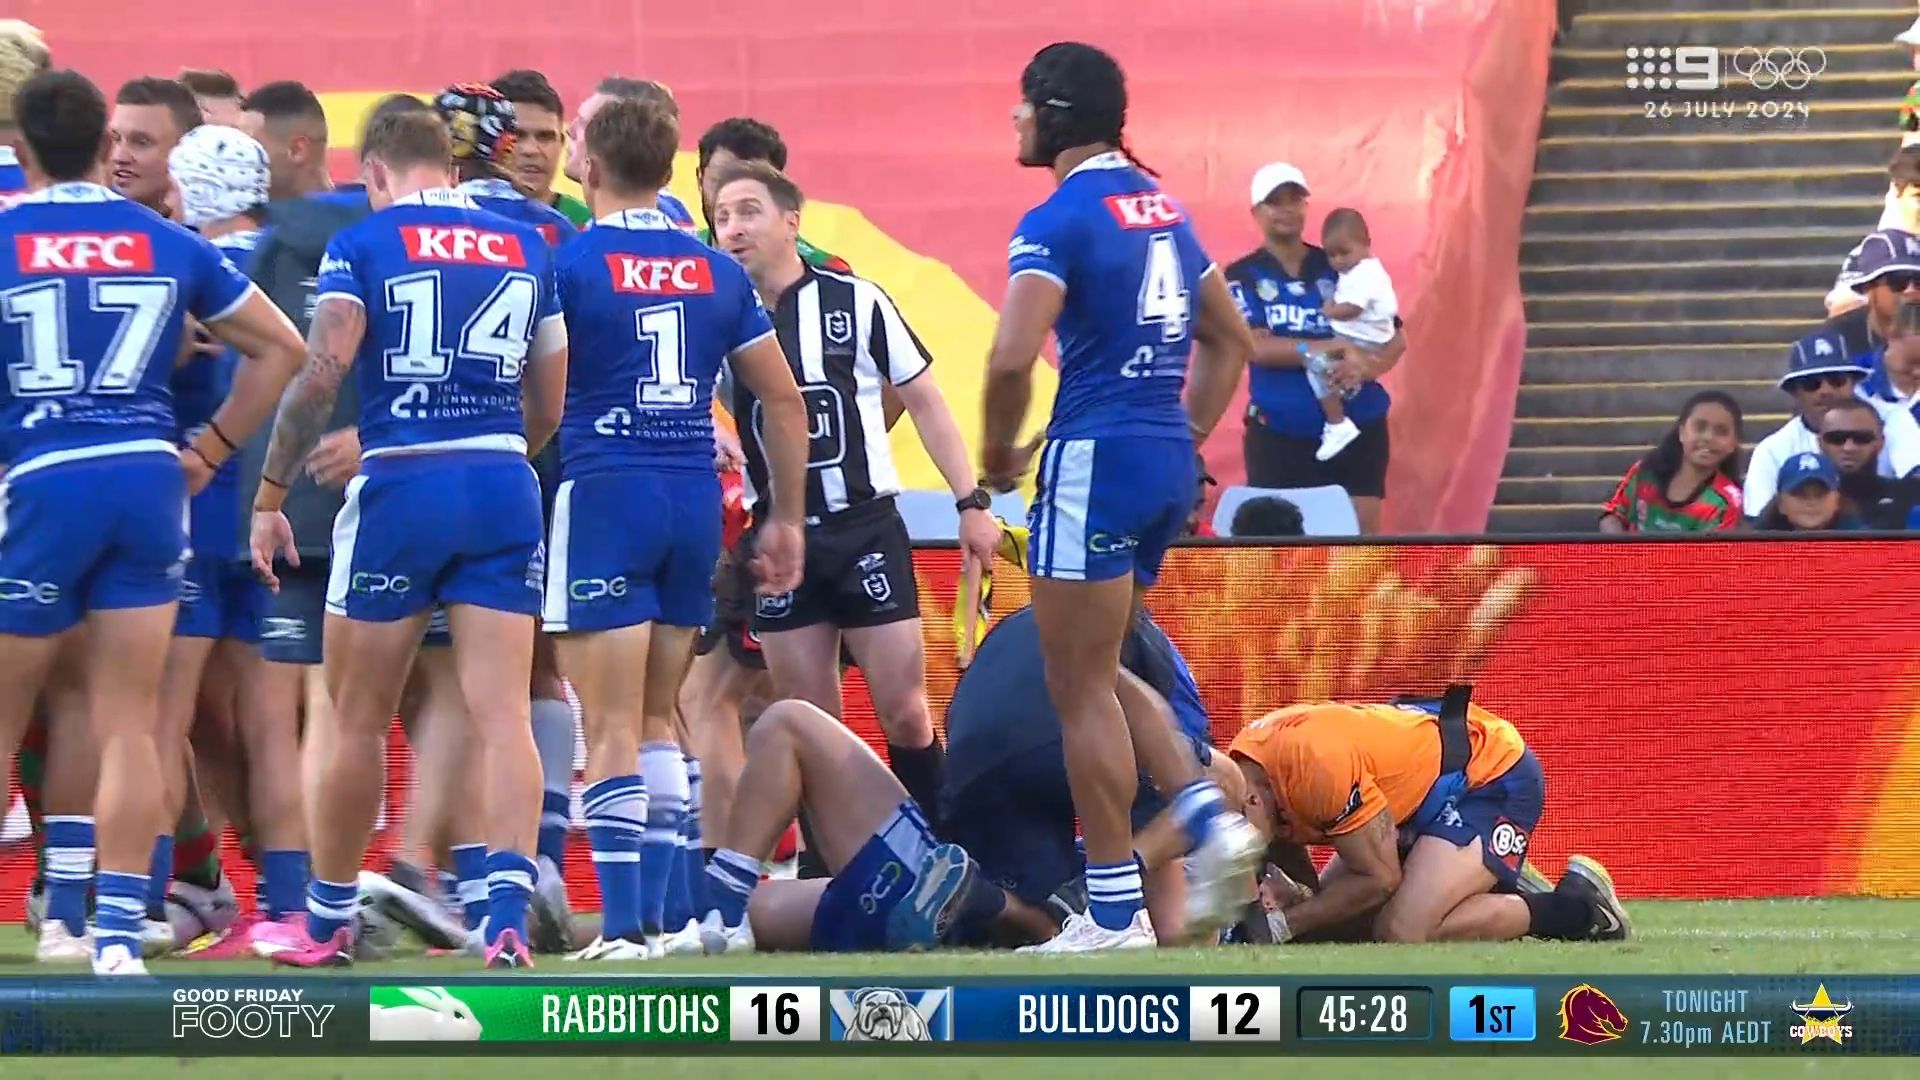 Jacob Preston returned to the field with broken jaw after brutal head clash against Rabbitohs